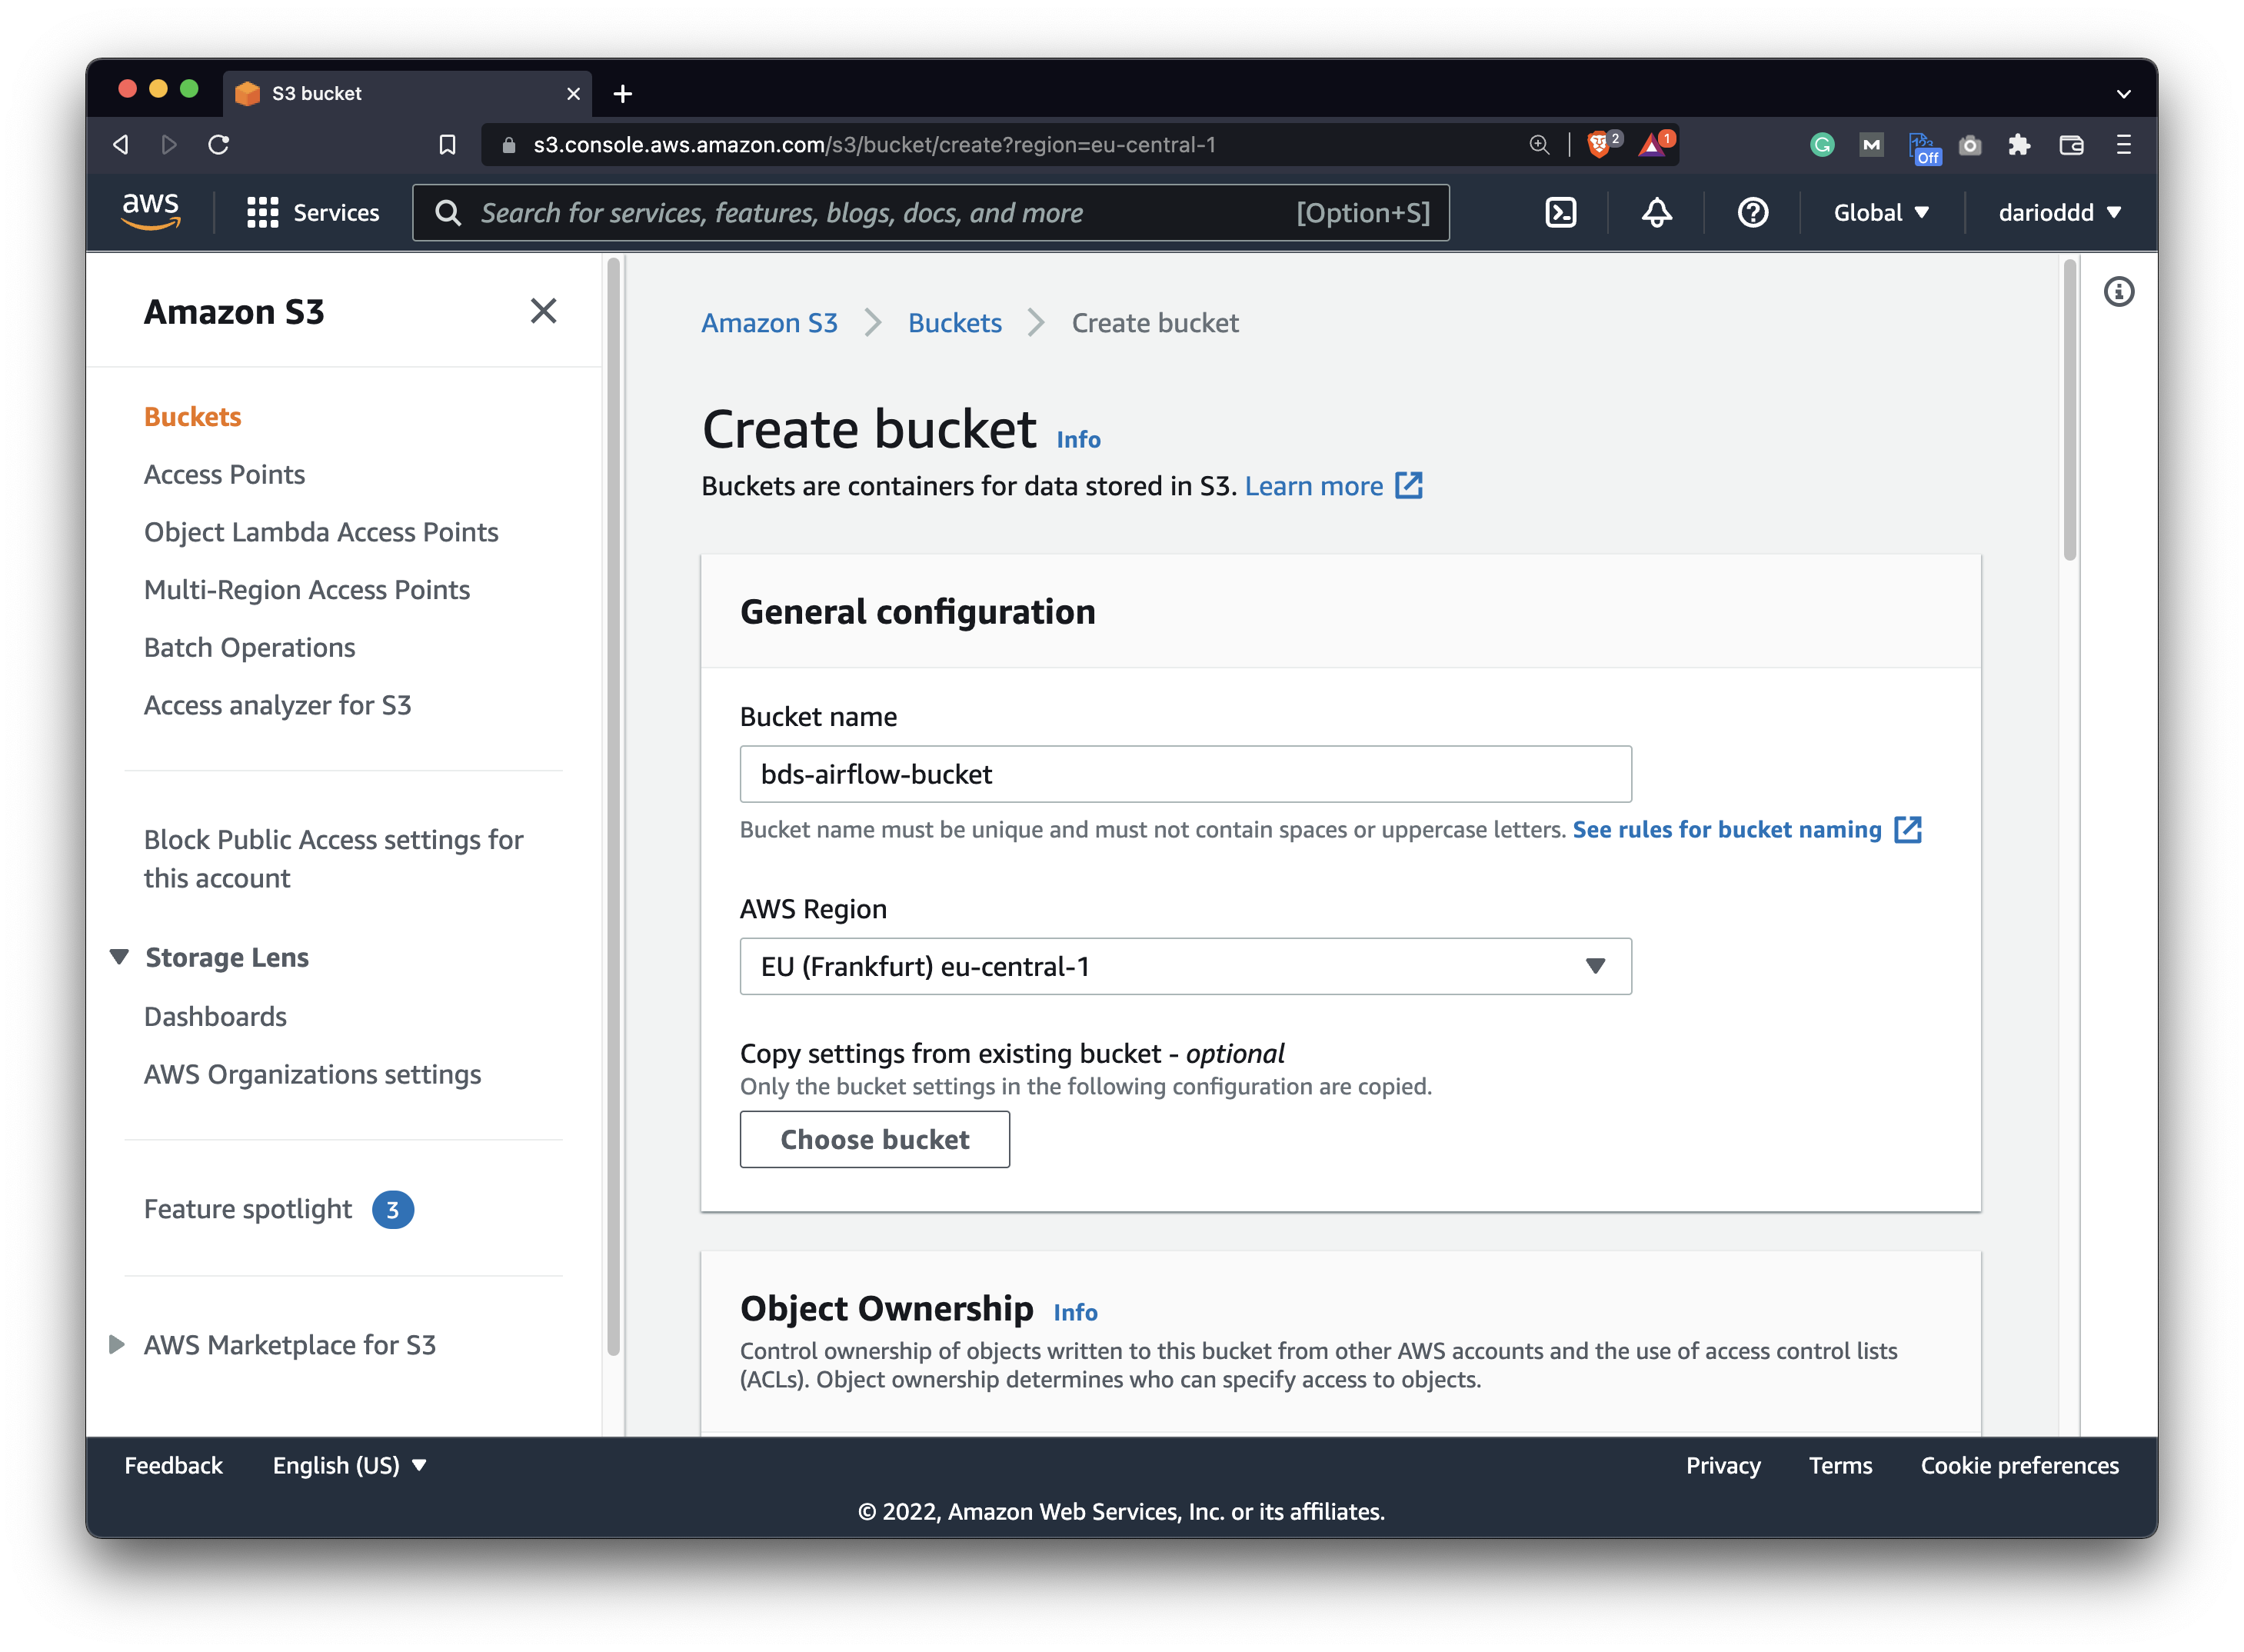 Image 1 - Creating a bucket on Amazon S3 (image by author)